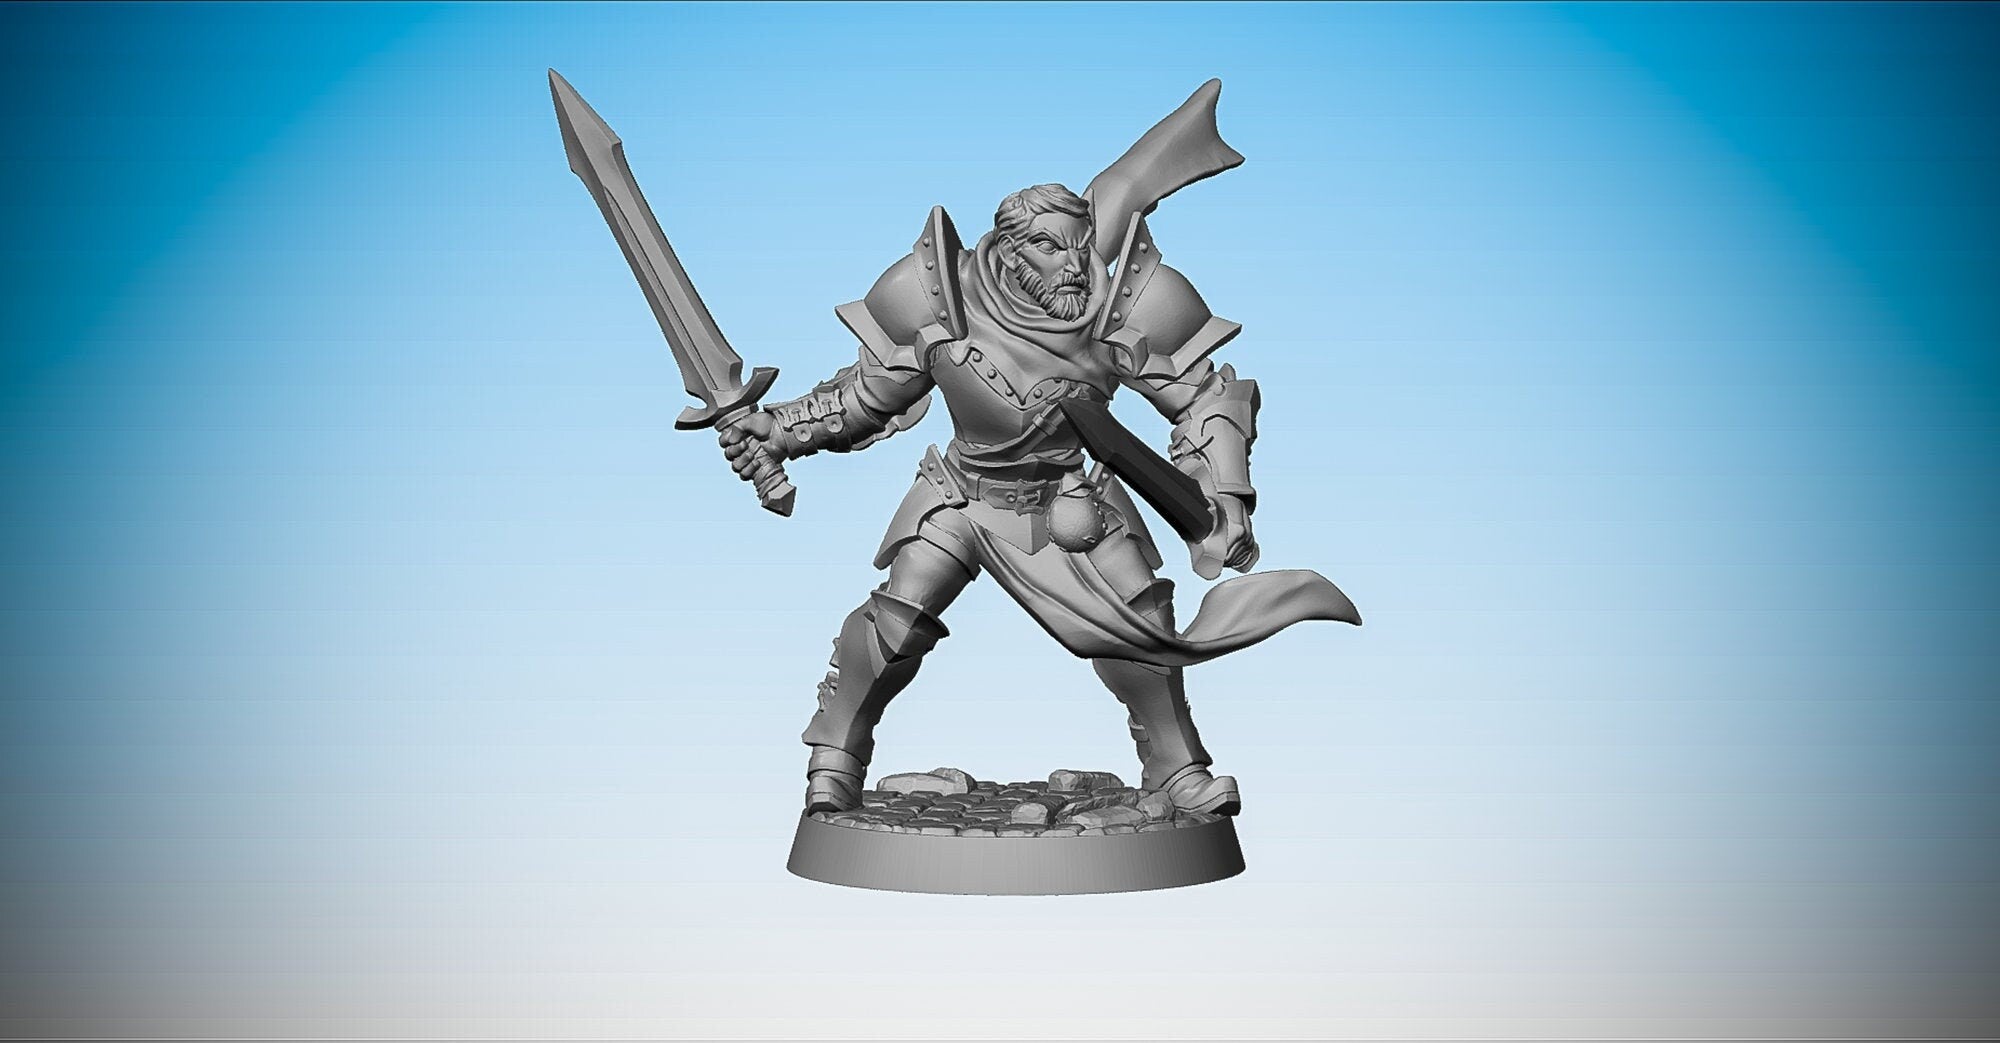 HUMAN WARRIOR "Dual Sword Wielder" | Dungeons and Dragons | DnD | Pathfinder | Tabletop | RPG | Hero Size | 28 mm-Role Playing Miniatures